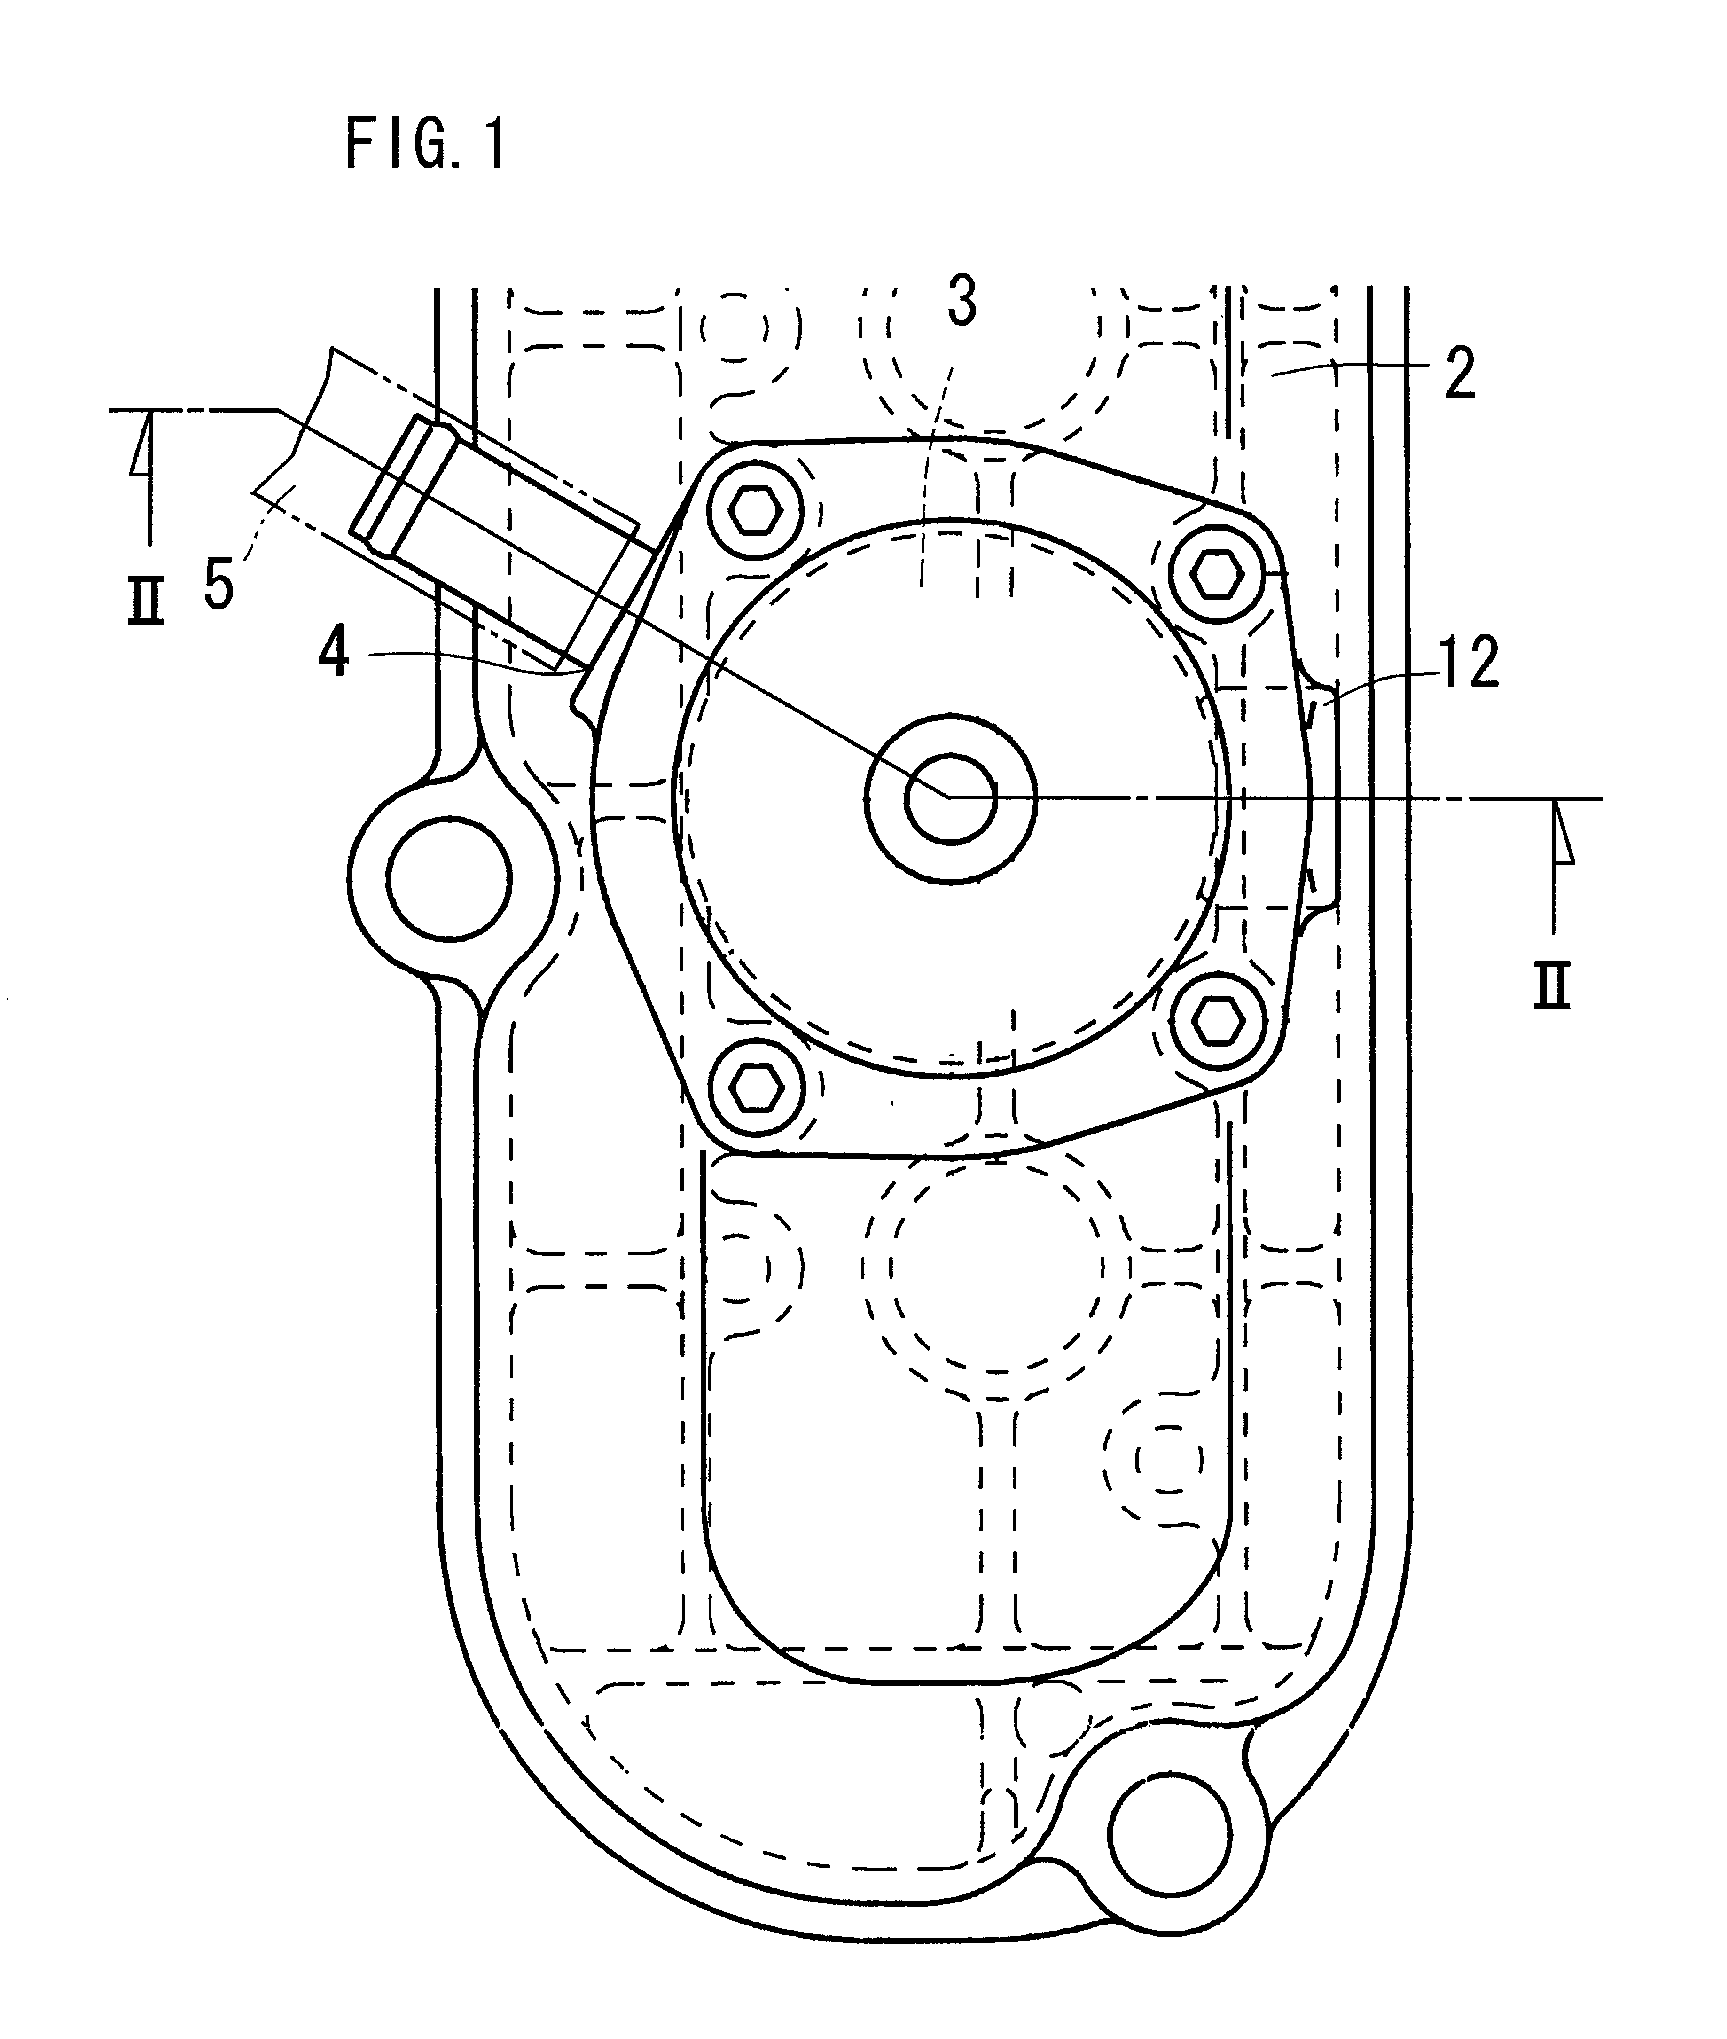 Breather device for an engine